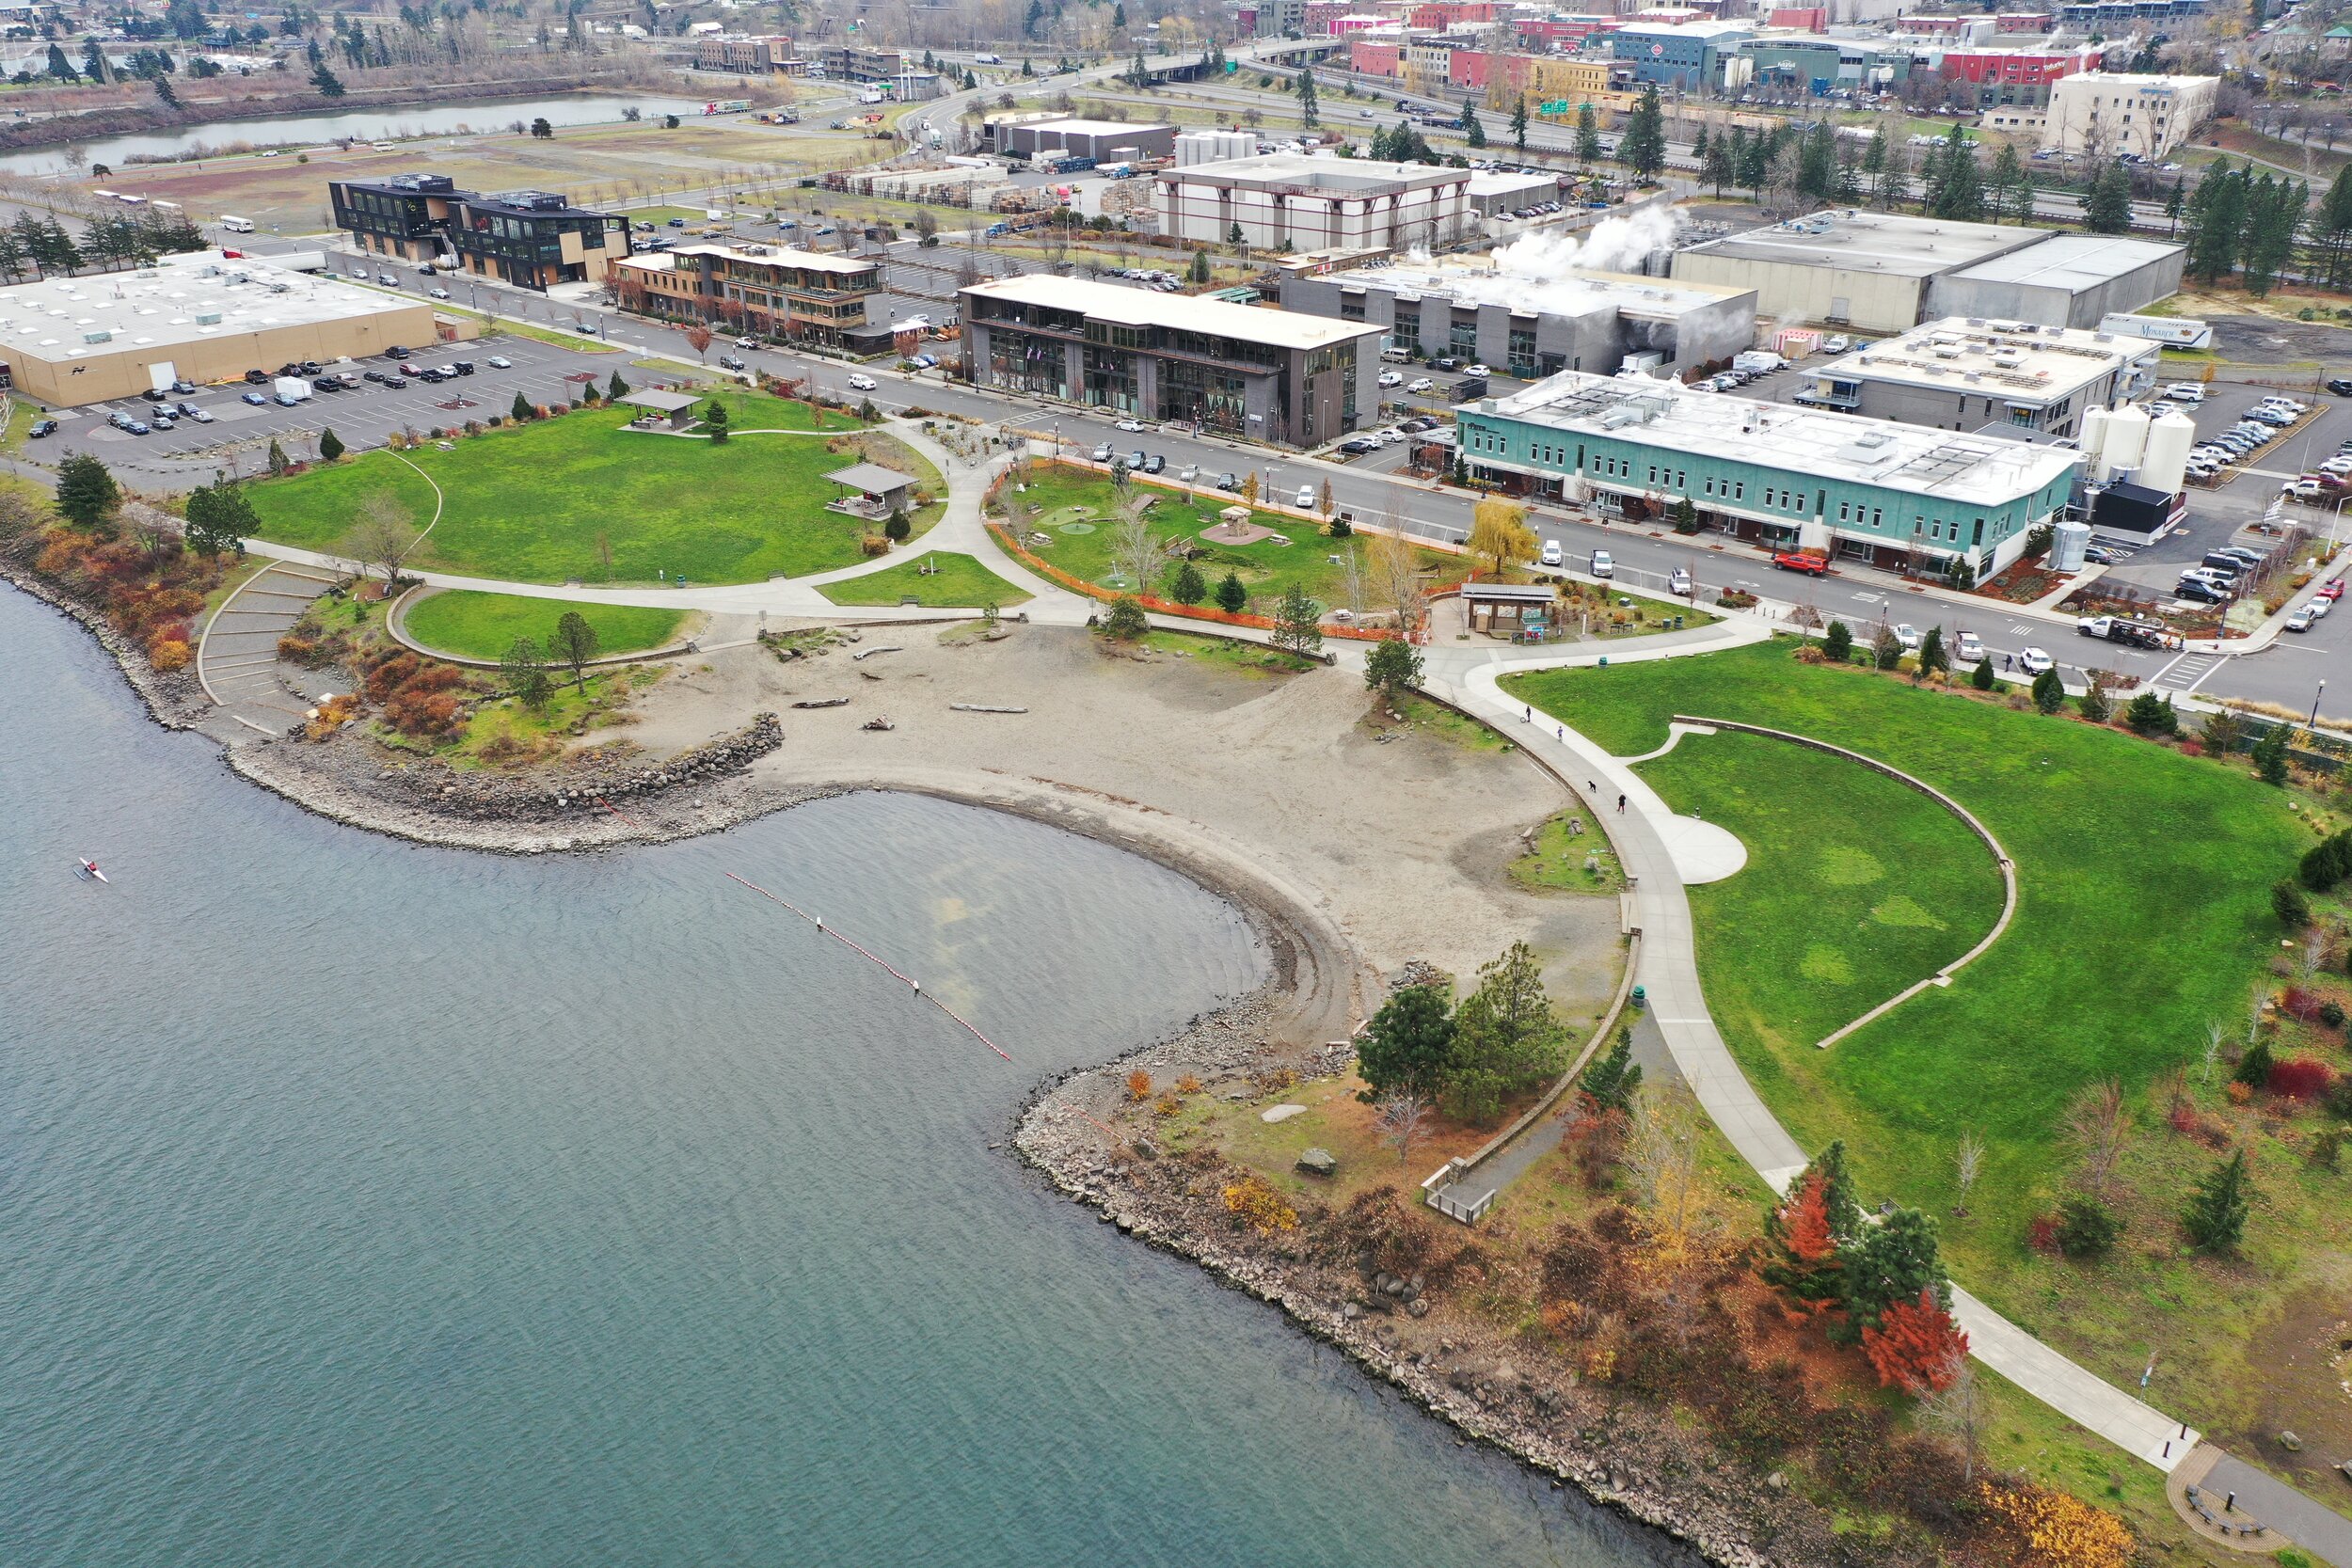 Hood_River_Waterfront_Park_South_View.JPG